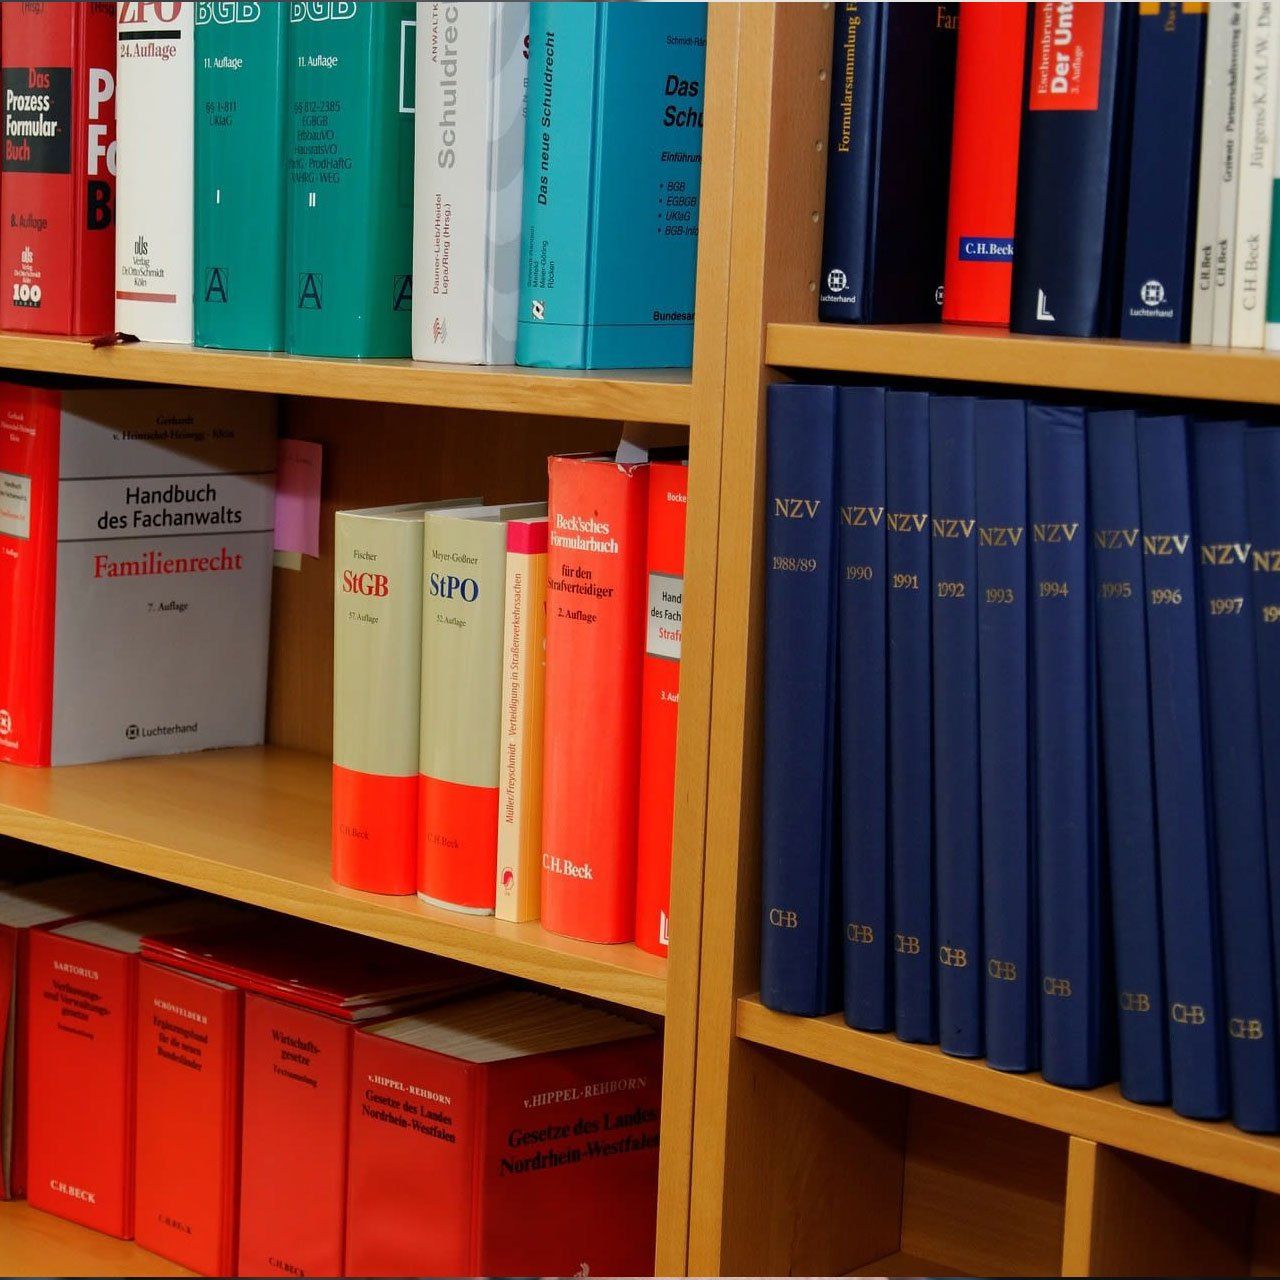 Books related to Law on shelves